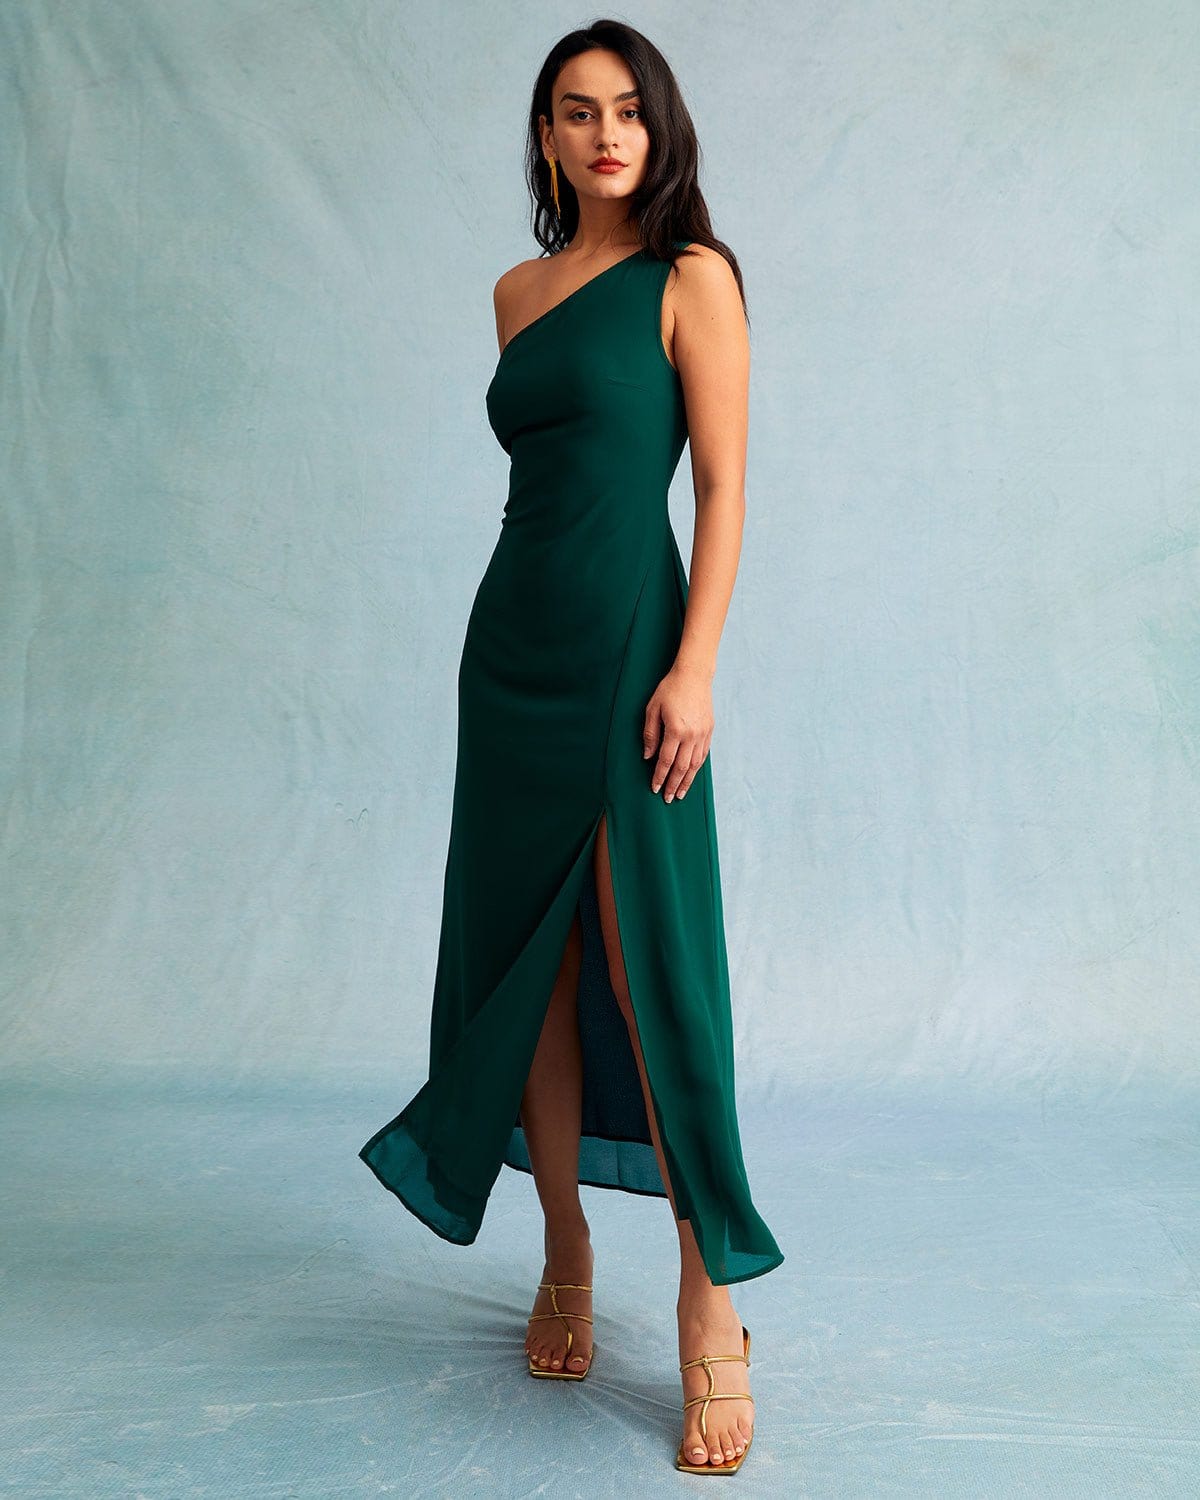 These Spring Maxi Dresses Start as Low as $27 at Amazon